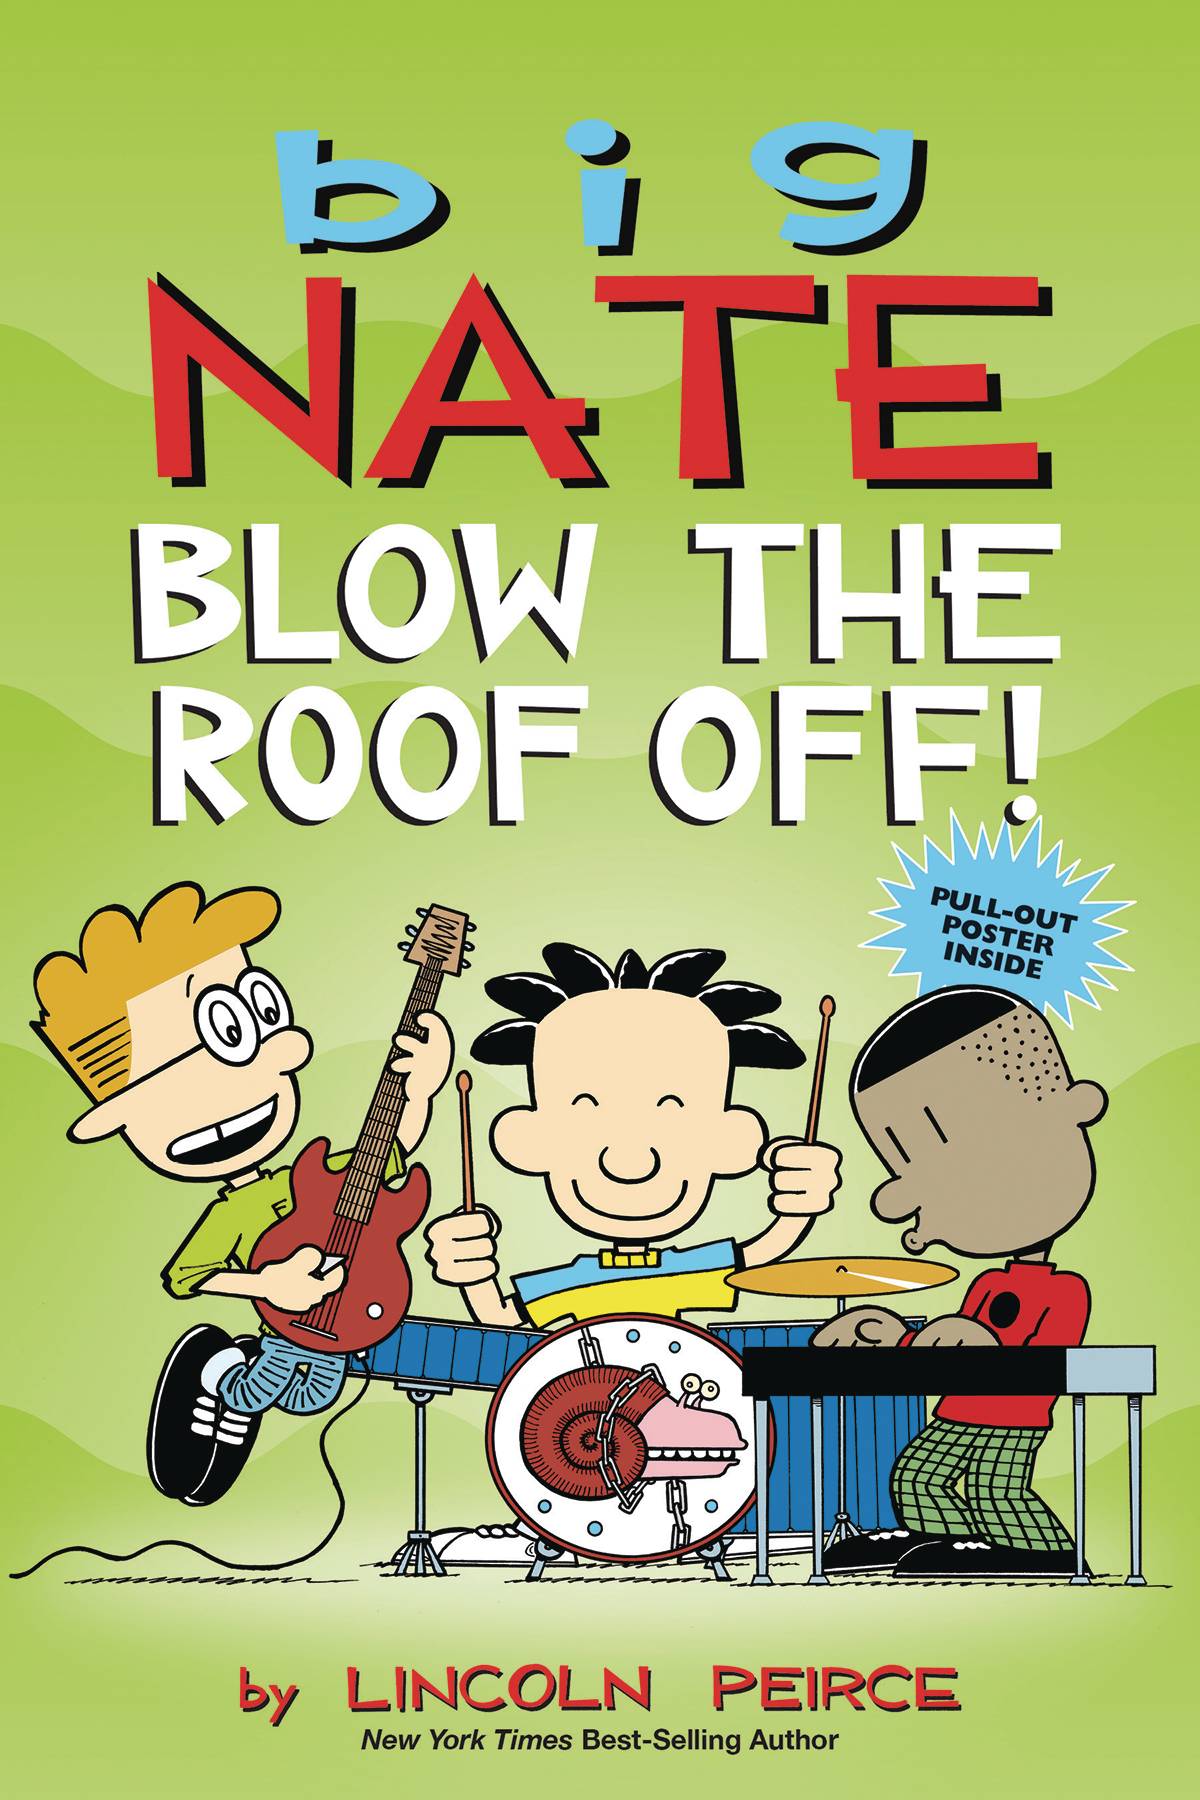 Big Nate Blow the Roof Off Graphic Novel